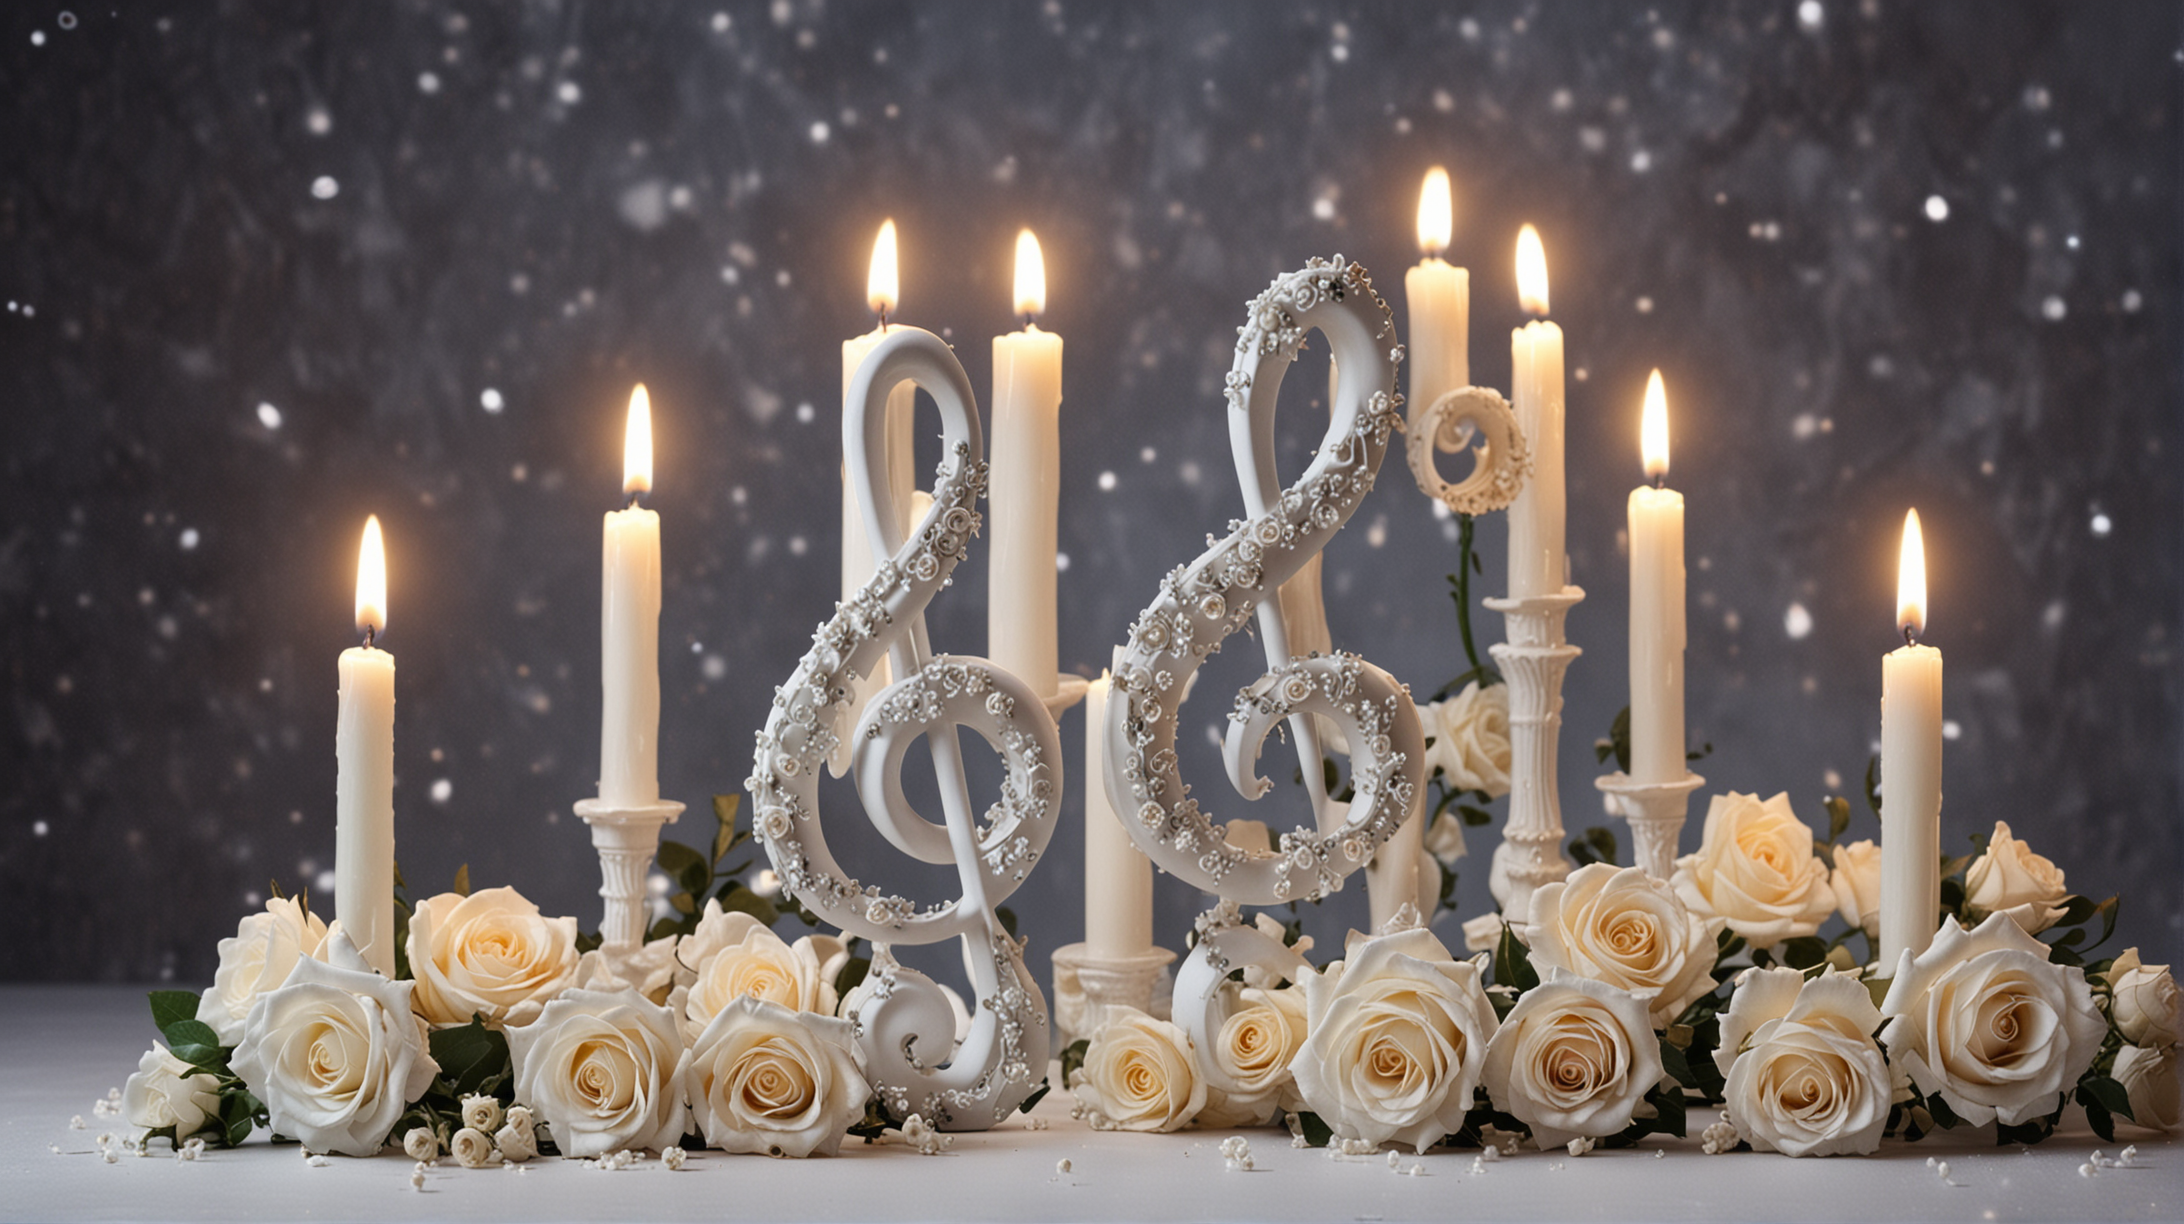 Evening, starry sky, one white a statuette in the form of a treble clef, candles, , pale roses, flowers